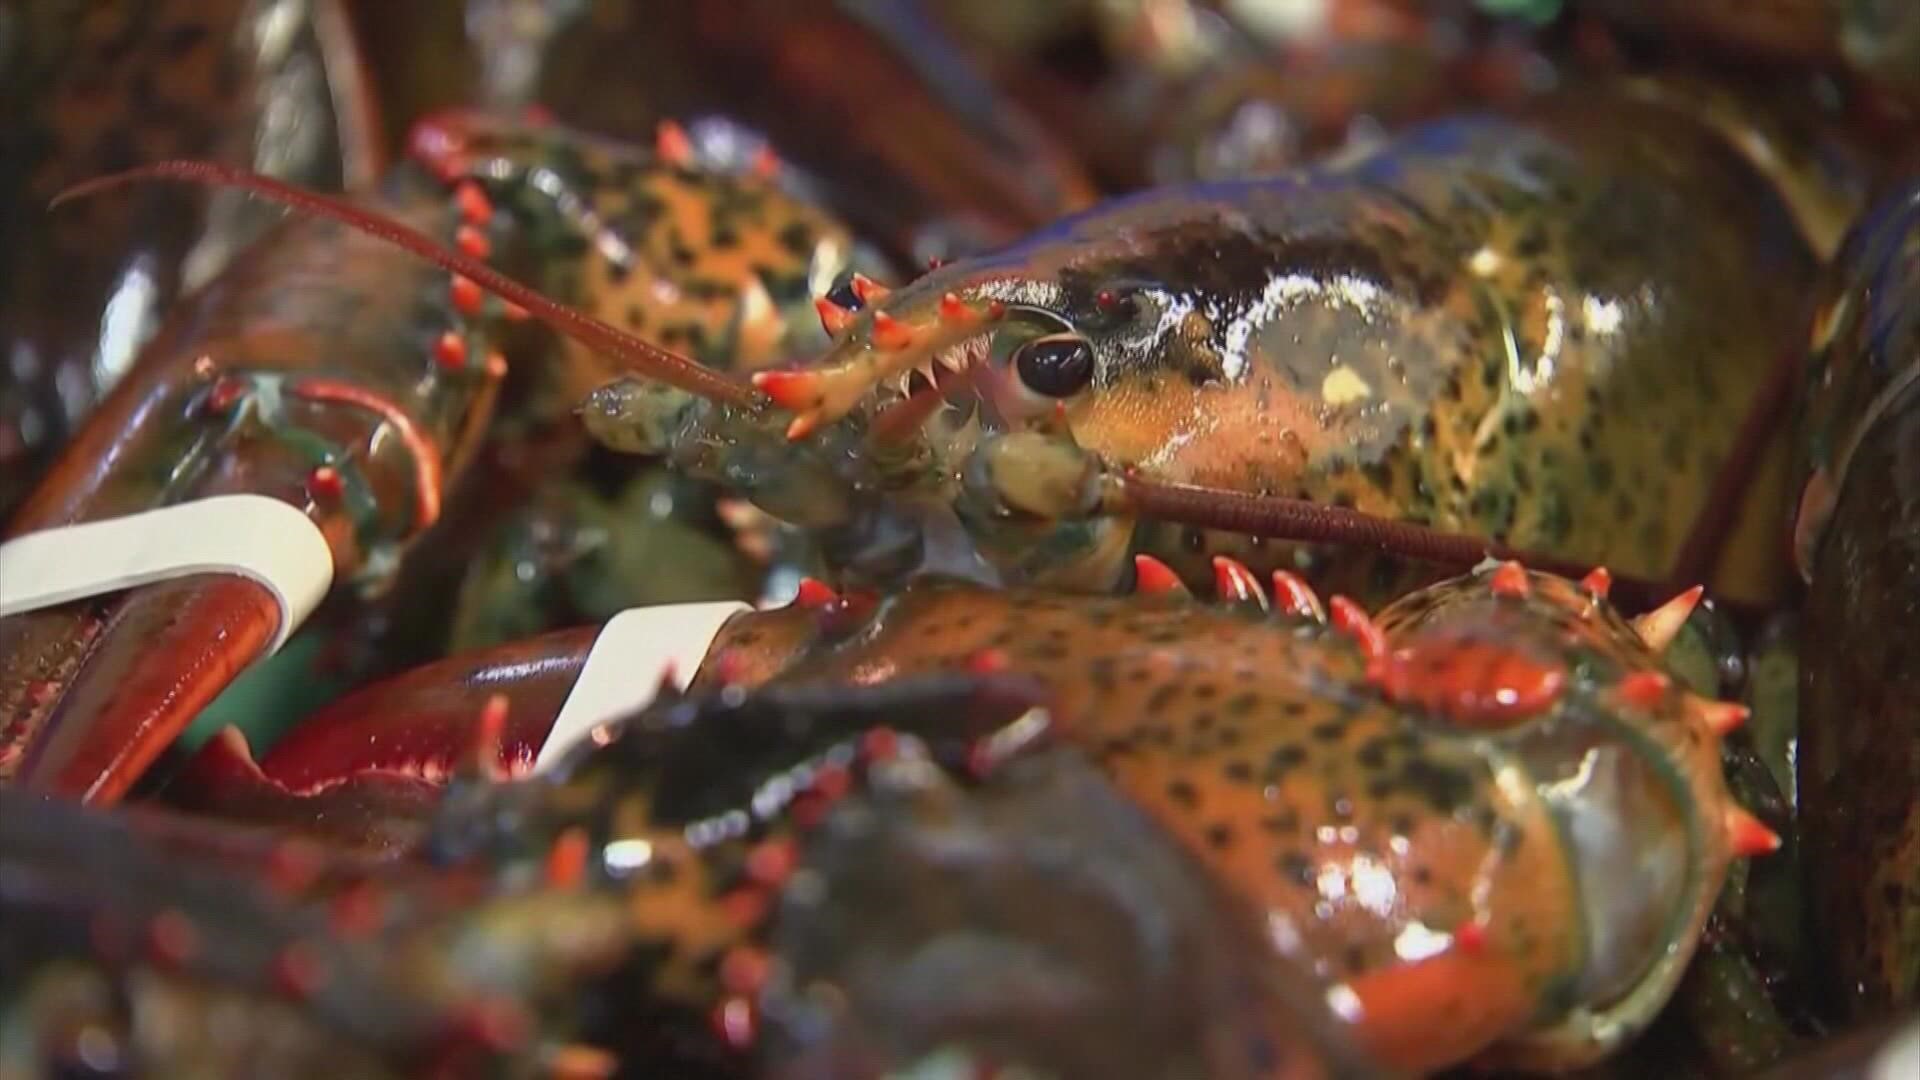 The Maine Lobstermen Association calls the ruling a "mixed bag" while conservation groups call it a "victory."